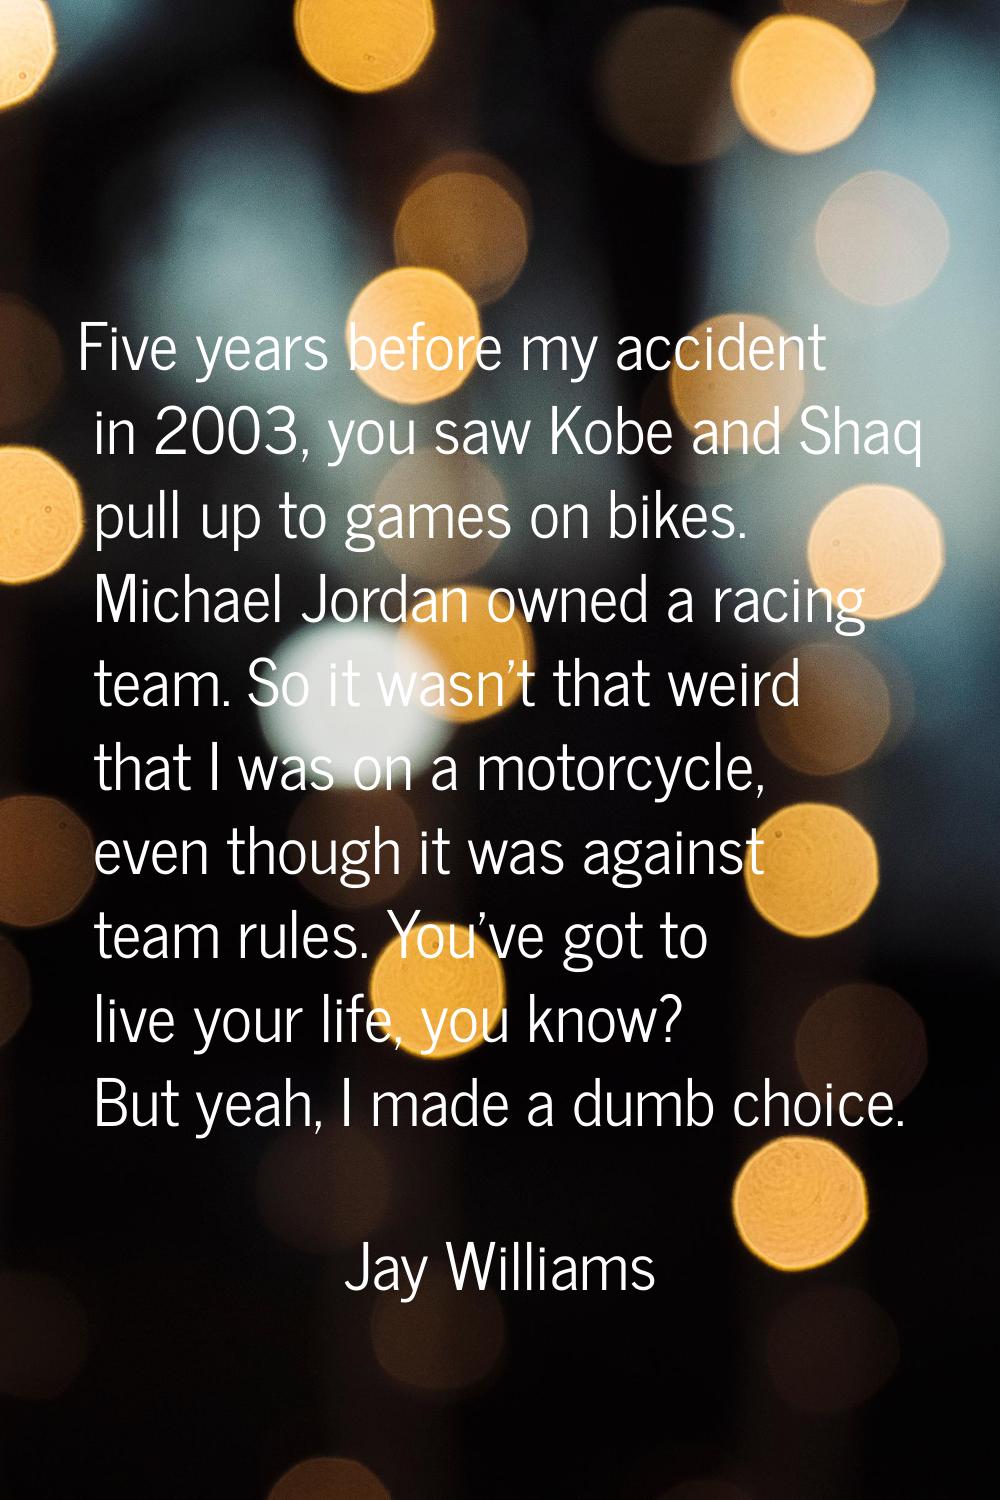 Five years before my accident in 2003, you saw Kobe and Shaq pull up to games on bikes. Michael Jor